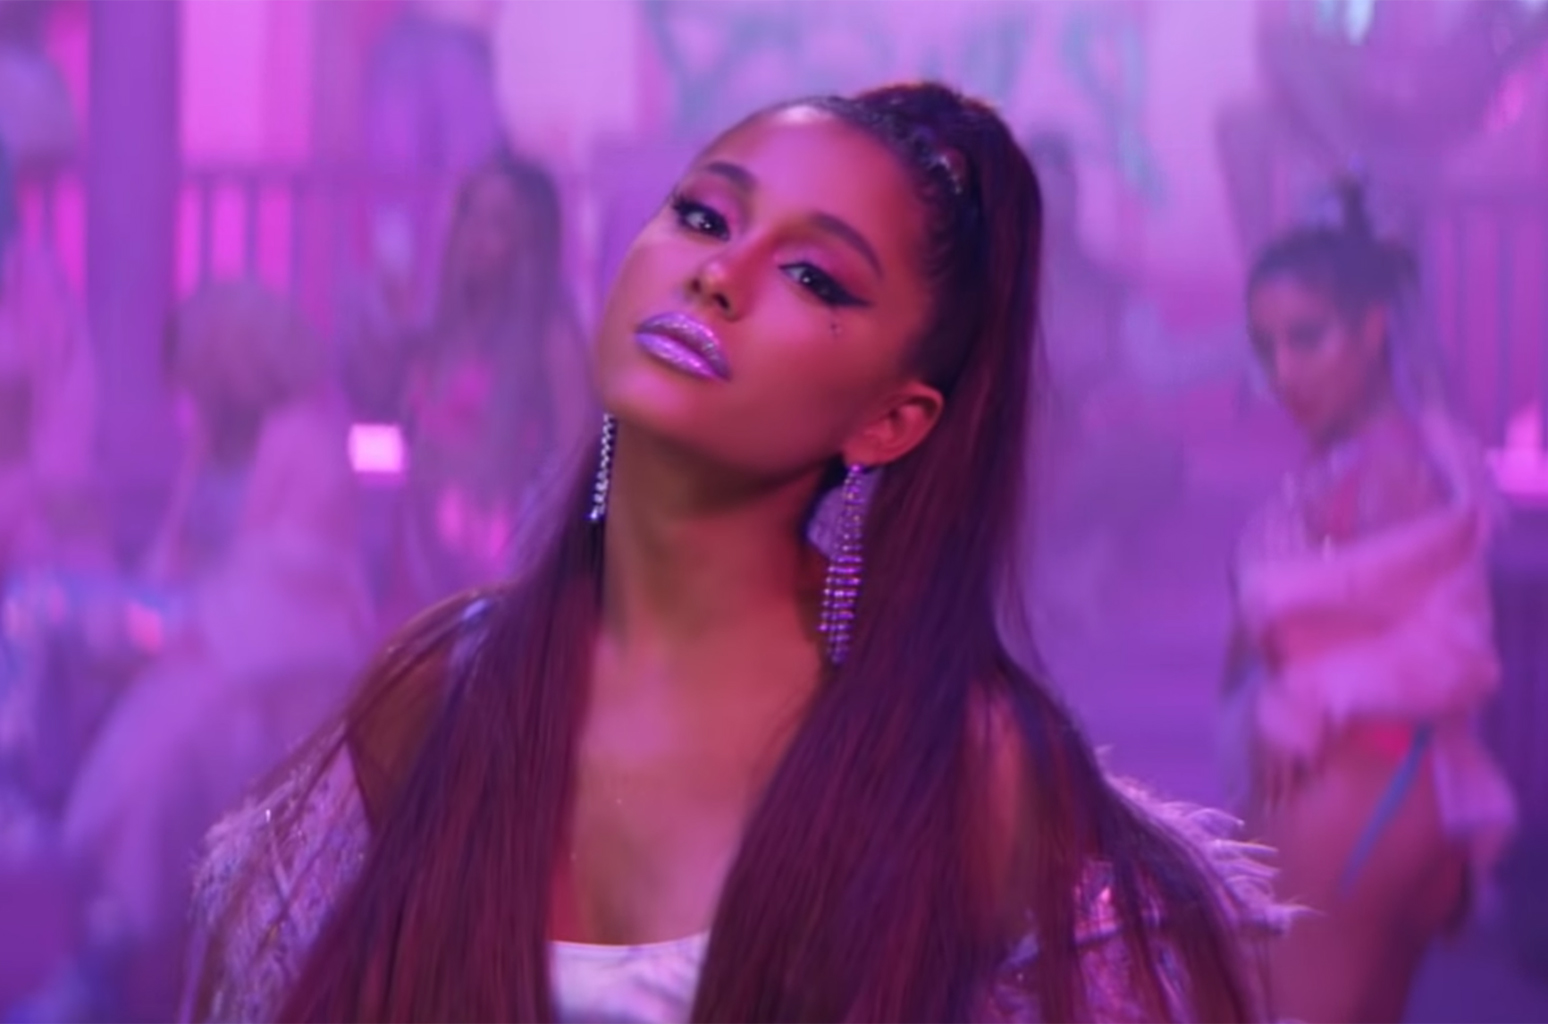 Who Are Ariana Grande's Friends in '7 Rings' Music Video?